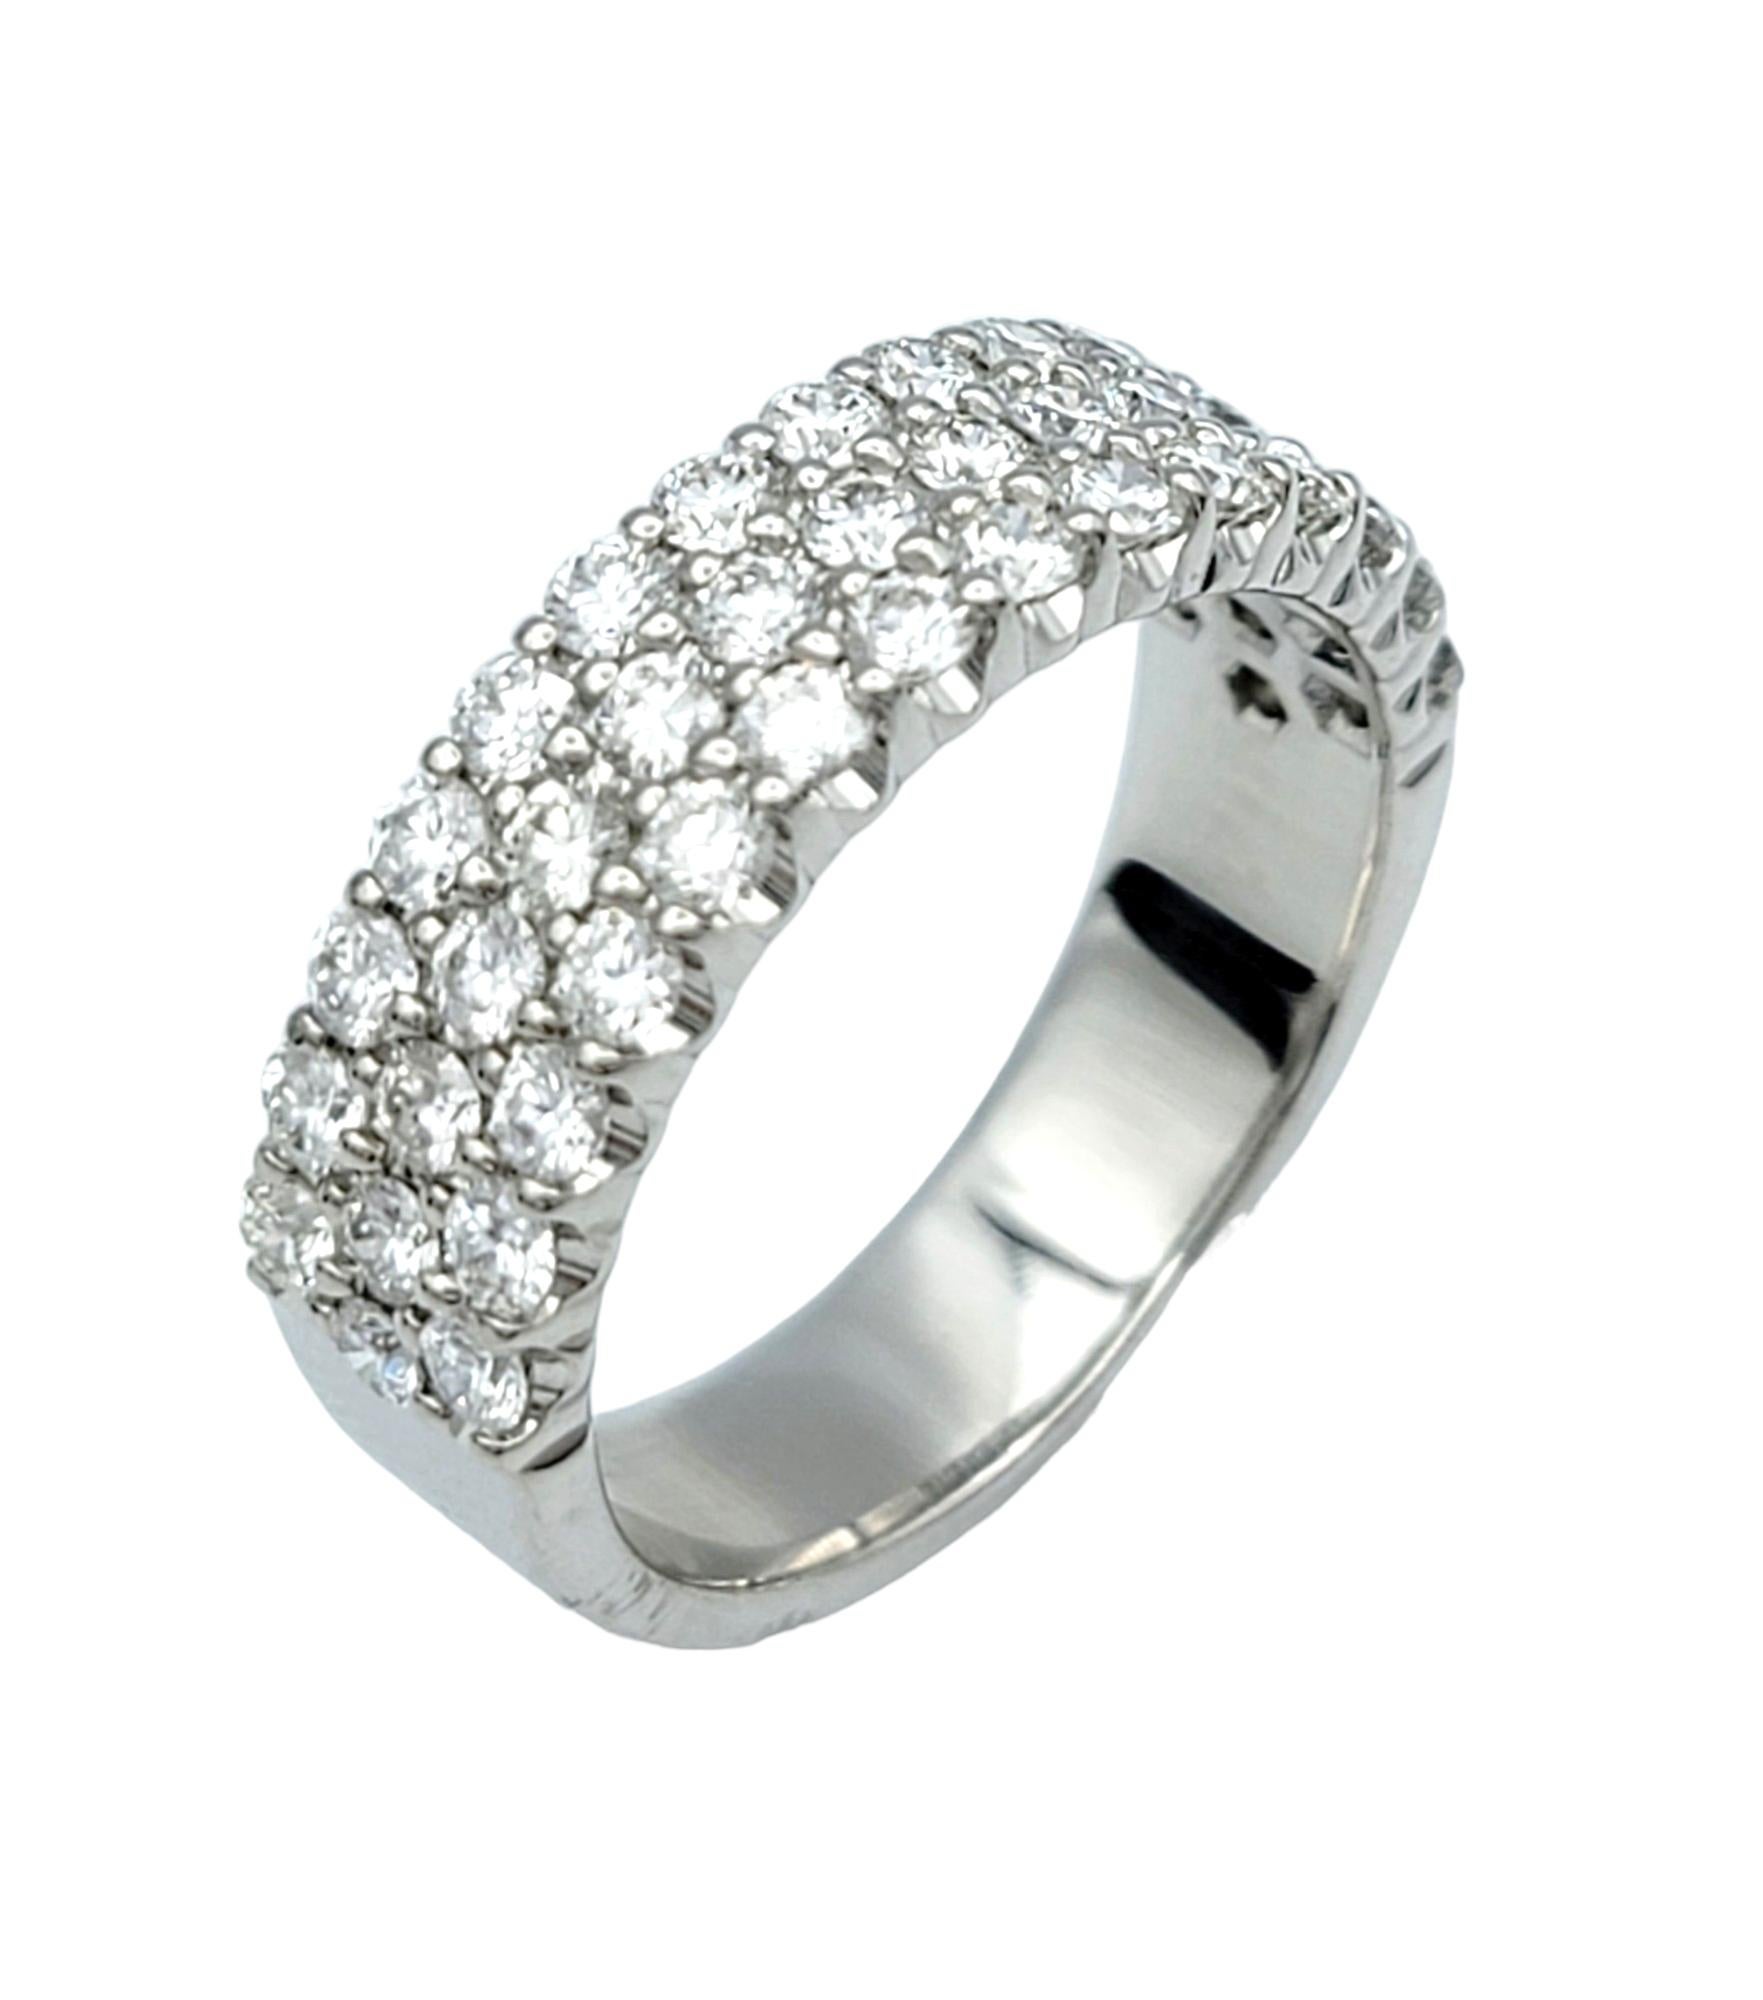 Ring size: 7.25

Elegance meets sophistication in this stunning three-row diamond band ring, meticulously crafted in lustrous 18 karat white gold. Designed to captivate and endure, this exquisite piece exudes timeless charm and luxurious